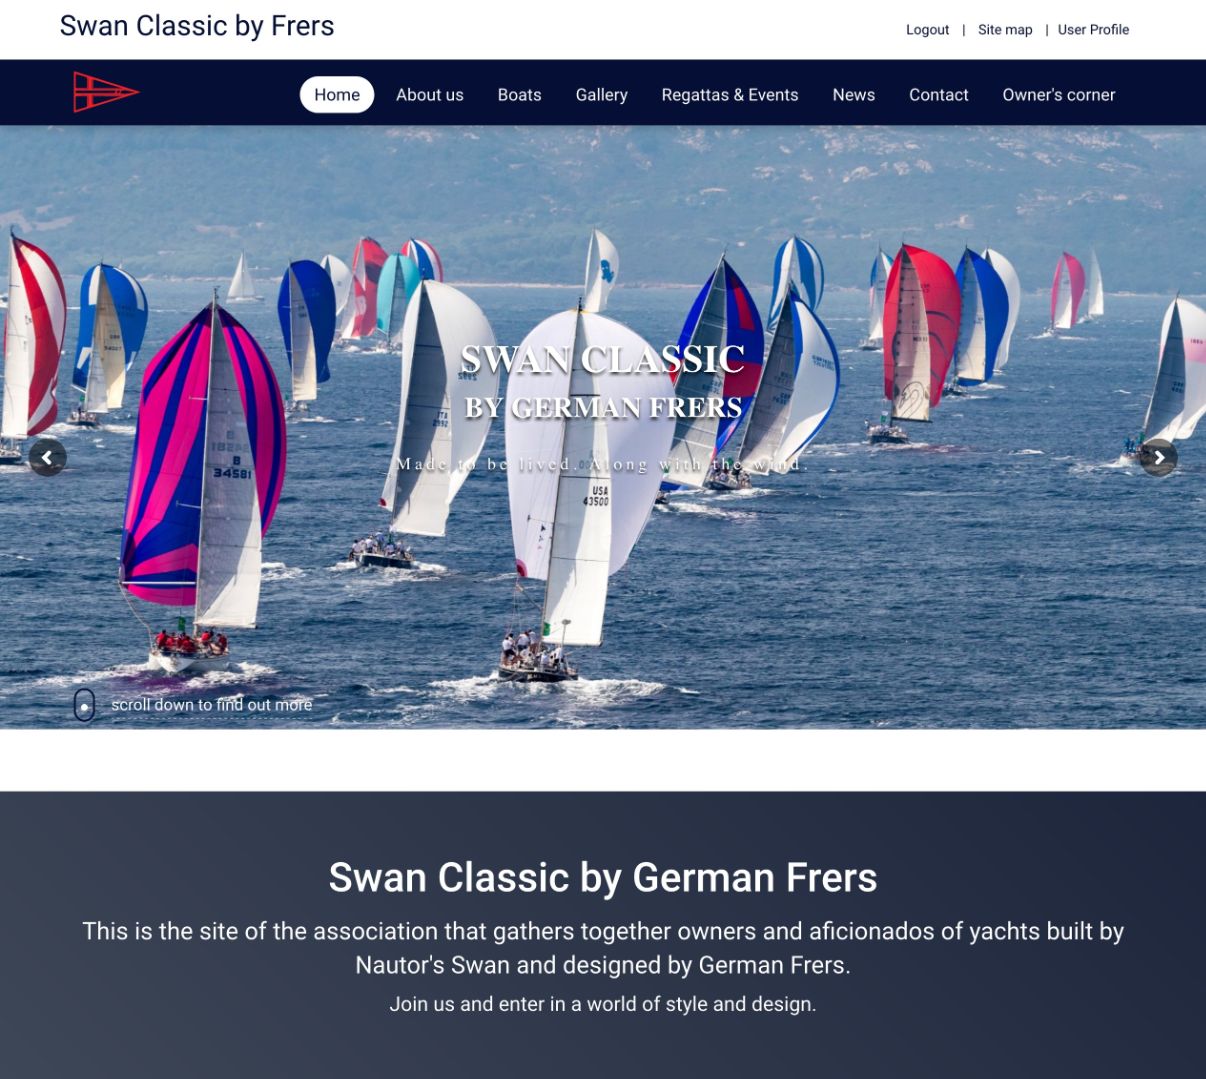 Gallery Swan Classic by German Frers - Home 1